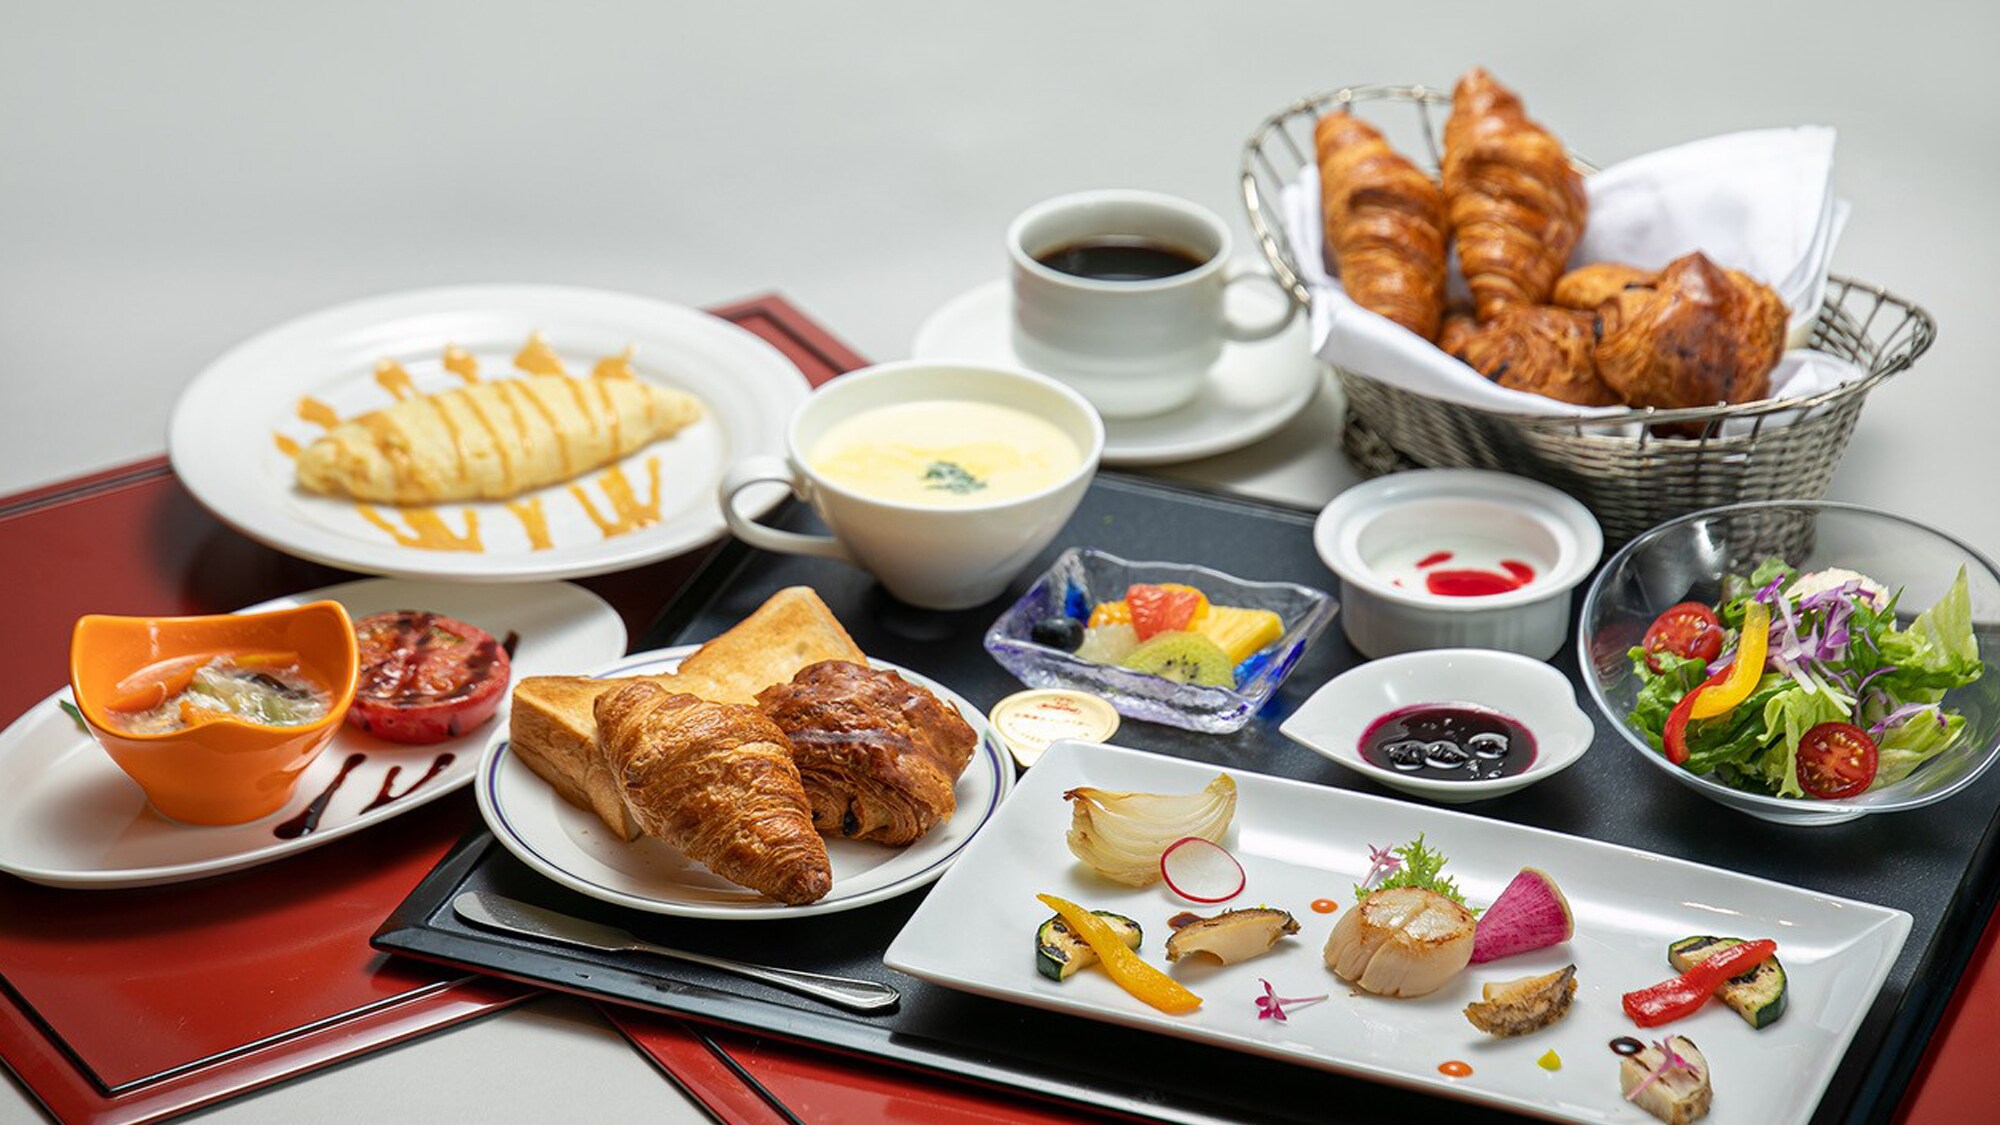 It is a set meal style breakfast image that suits the new lifestyle.